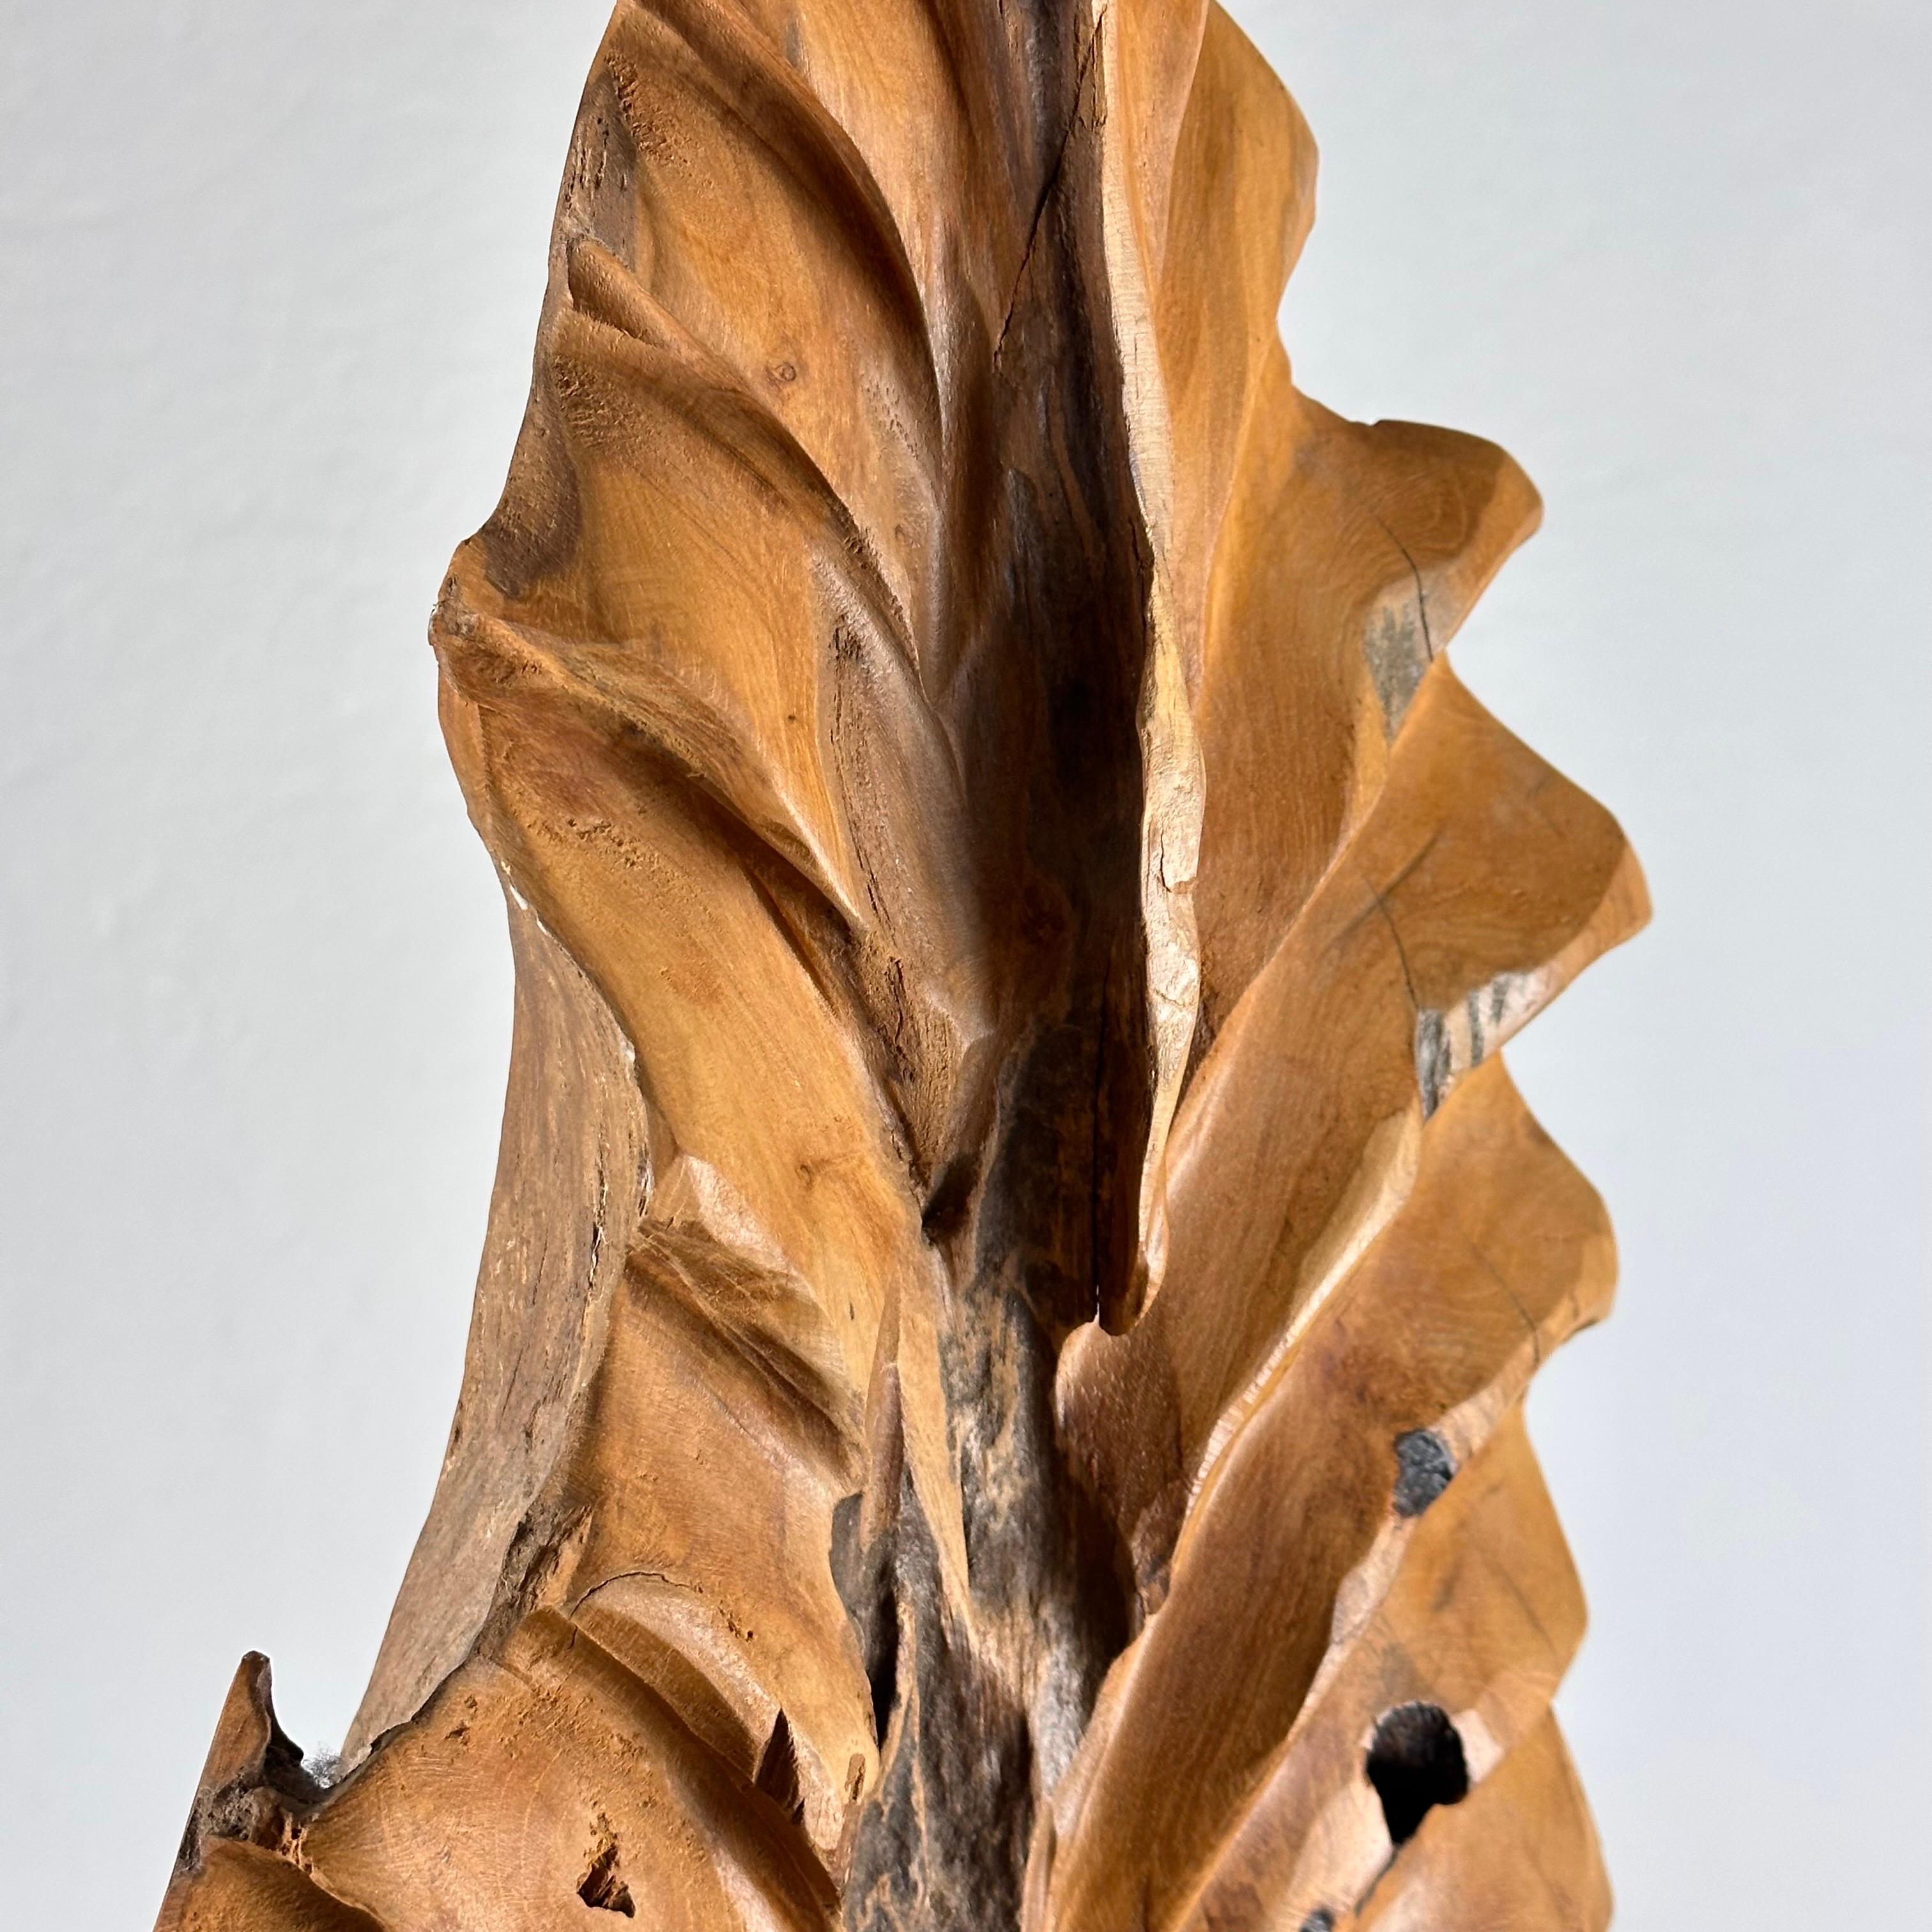 Exquisite Italian Phytomorphic Abstract Sculpture in Natural Ash, 1960s For Sale 3